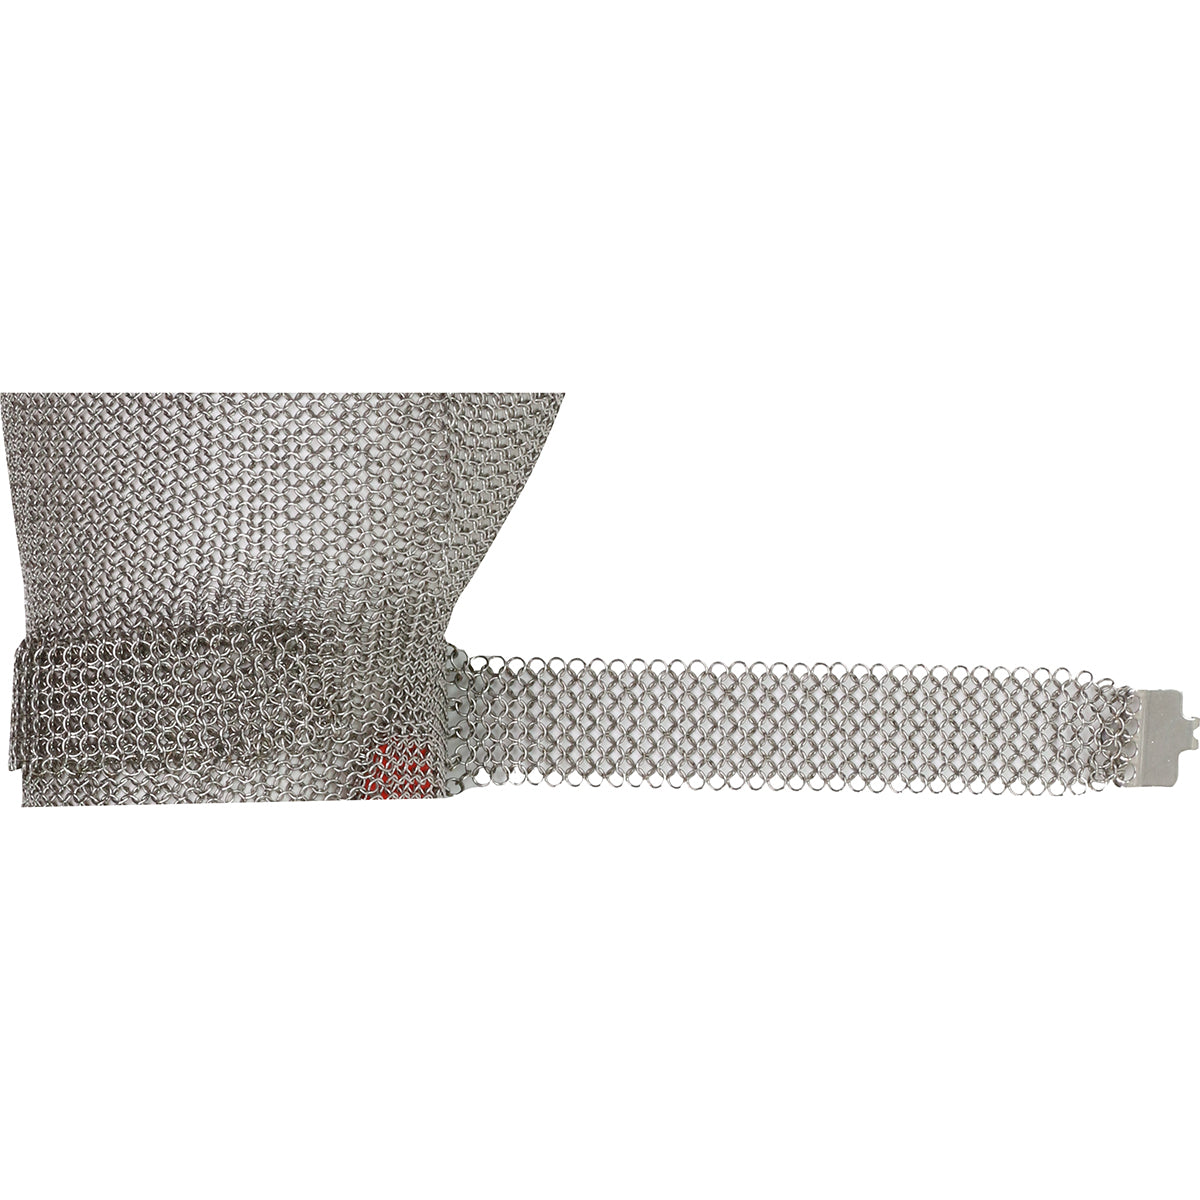 US Mesh USM-1547-XL Stainless Steel Mesh Glove with Spring Closure - Forearm Length